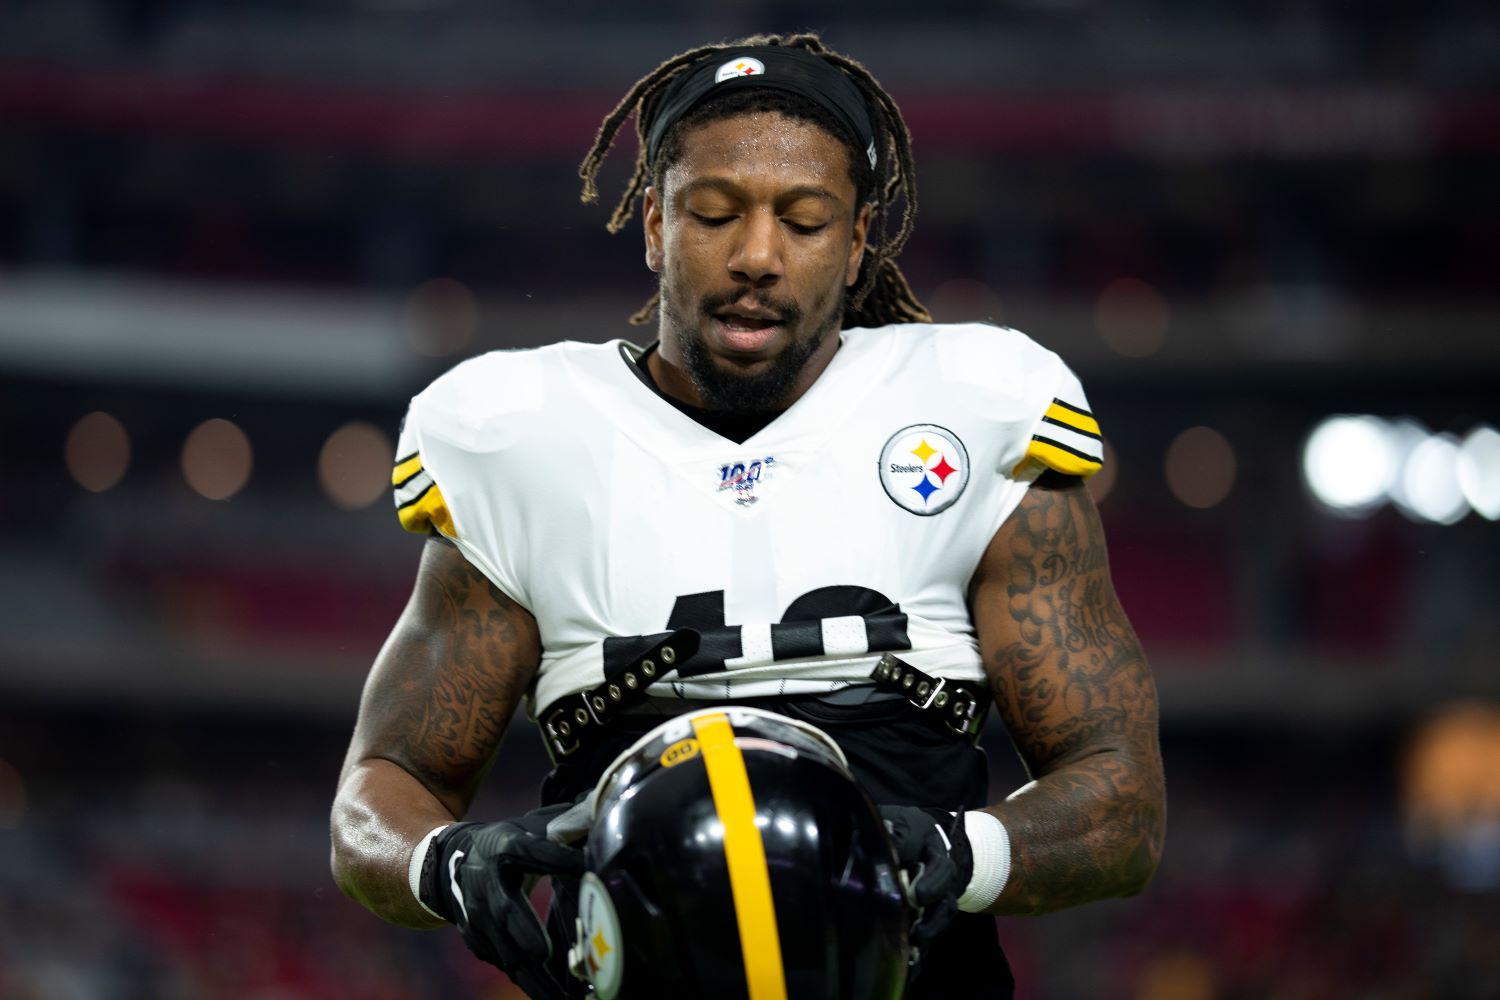 After suffering a torn ACL against the Ravens, star linebacker Bud Dupree may have just played his final snap with the Pittsburgh Steelers.